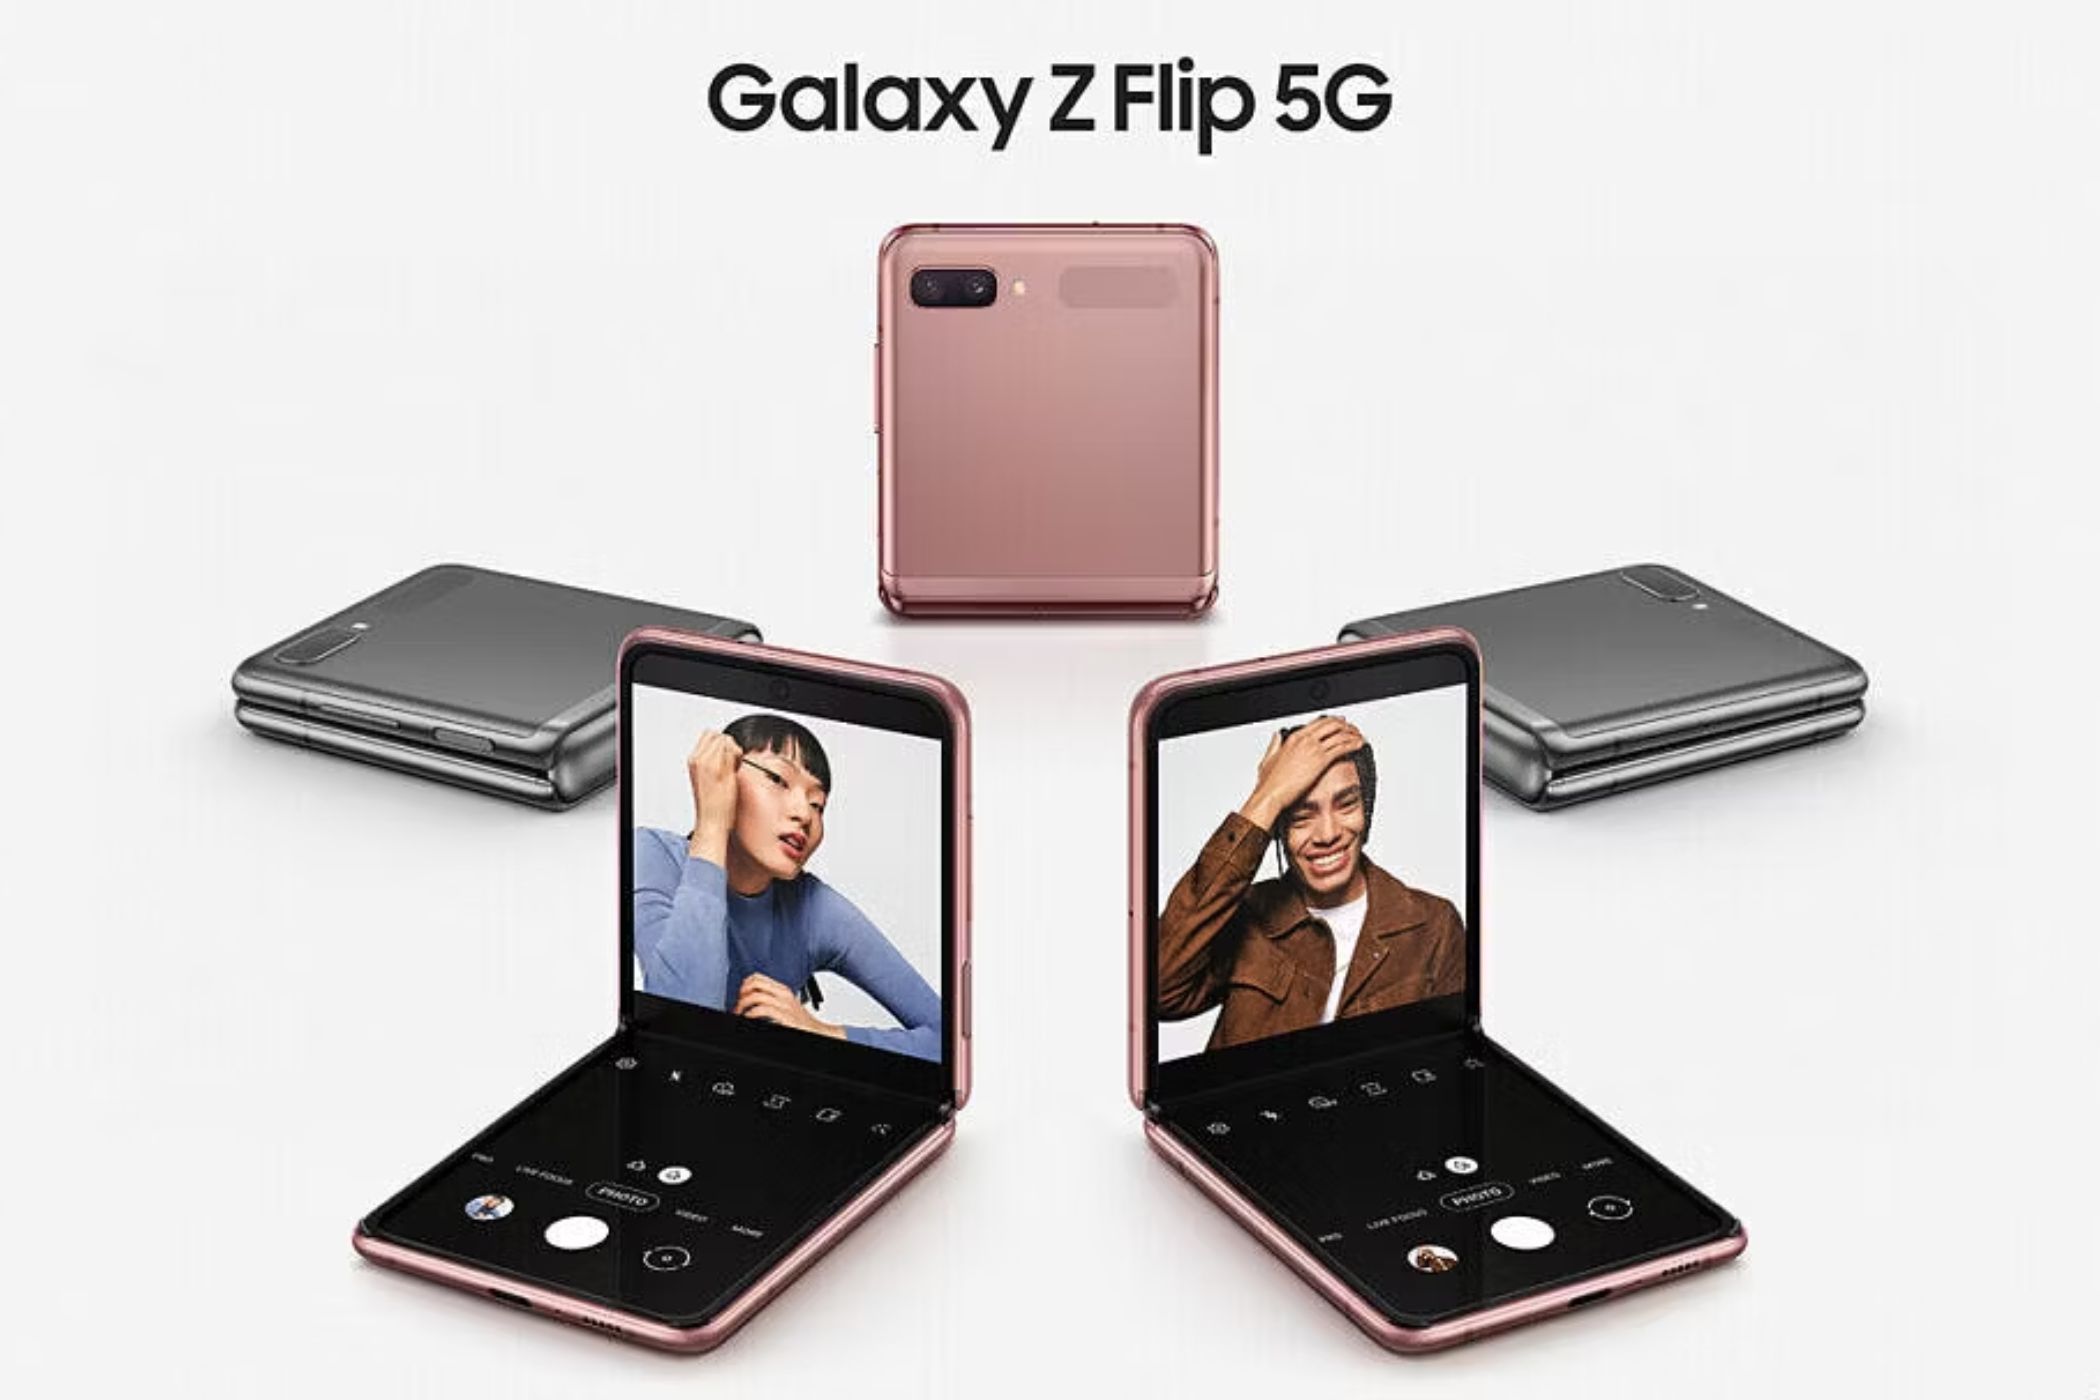 A render showing the promotional image of Samsung Galaxy Z Flip 5G.